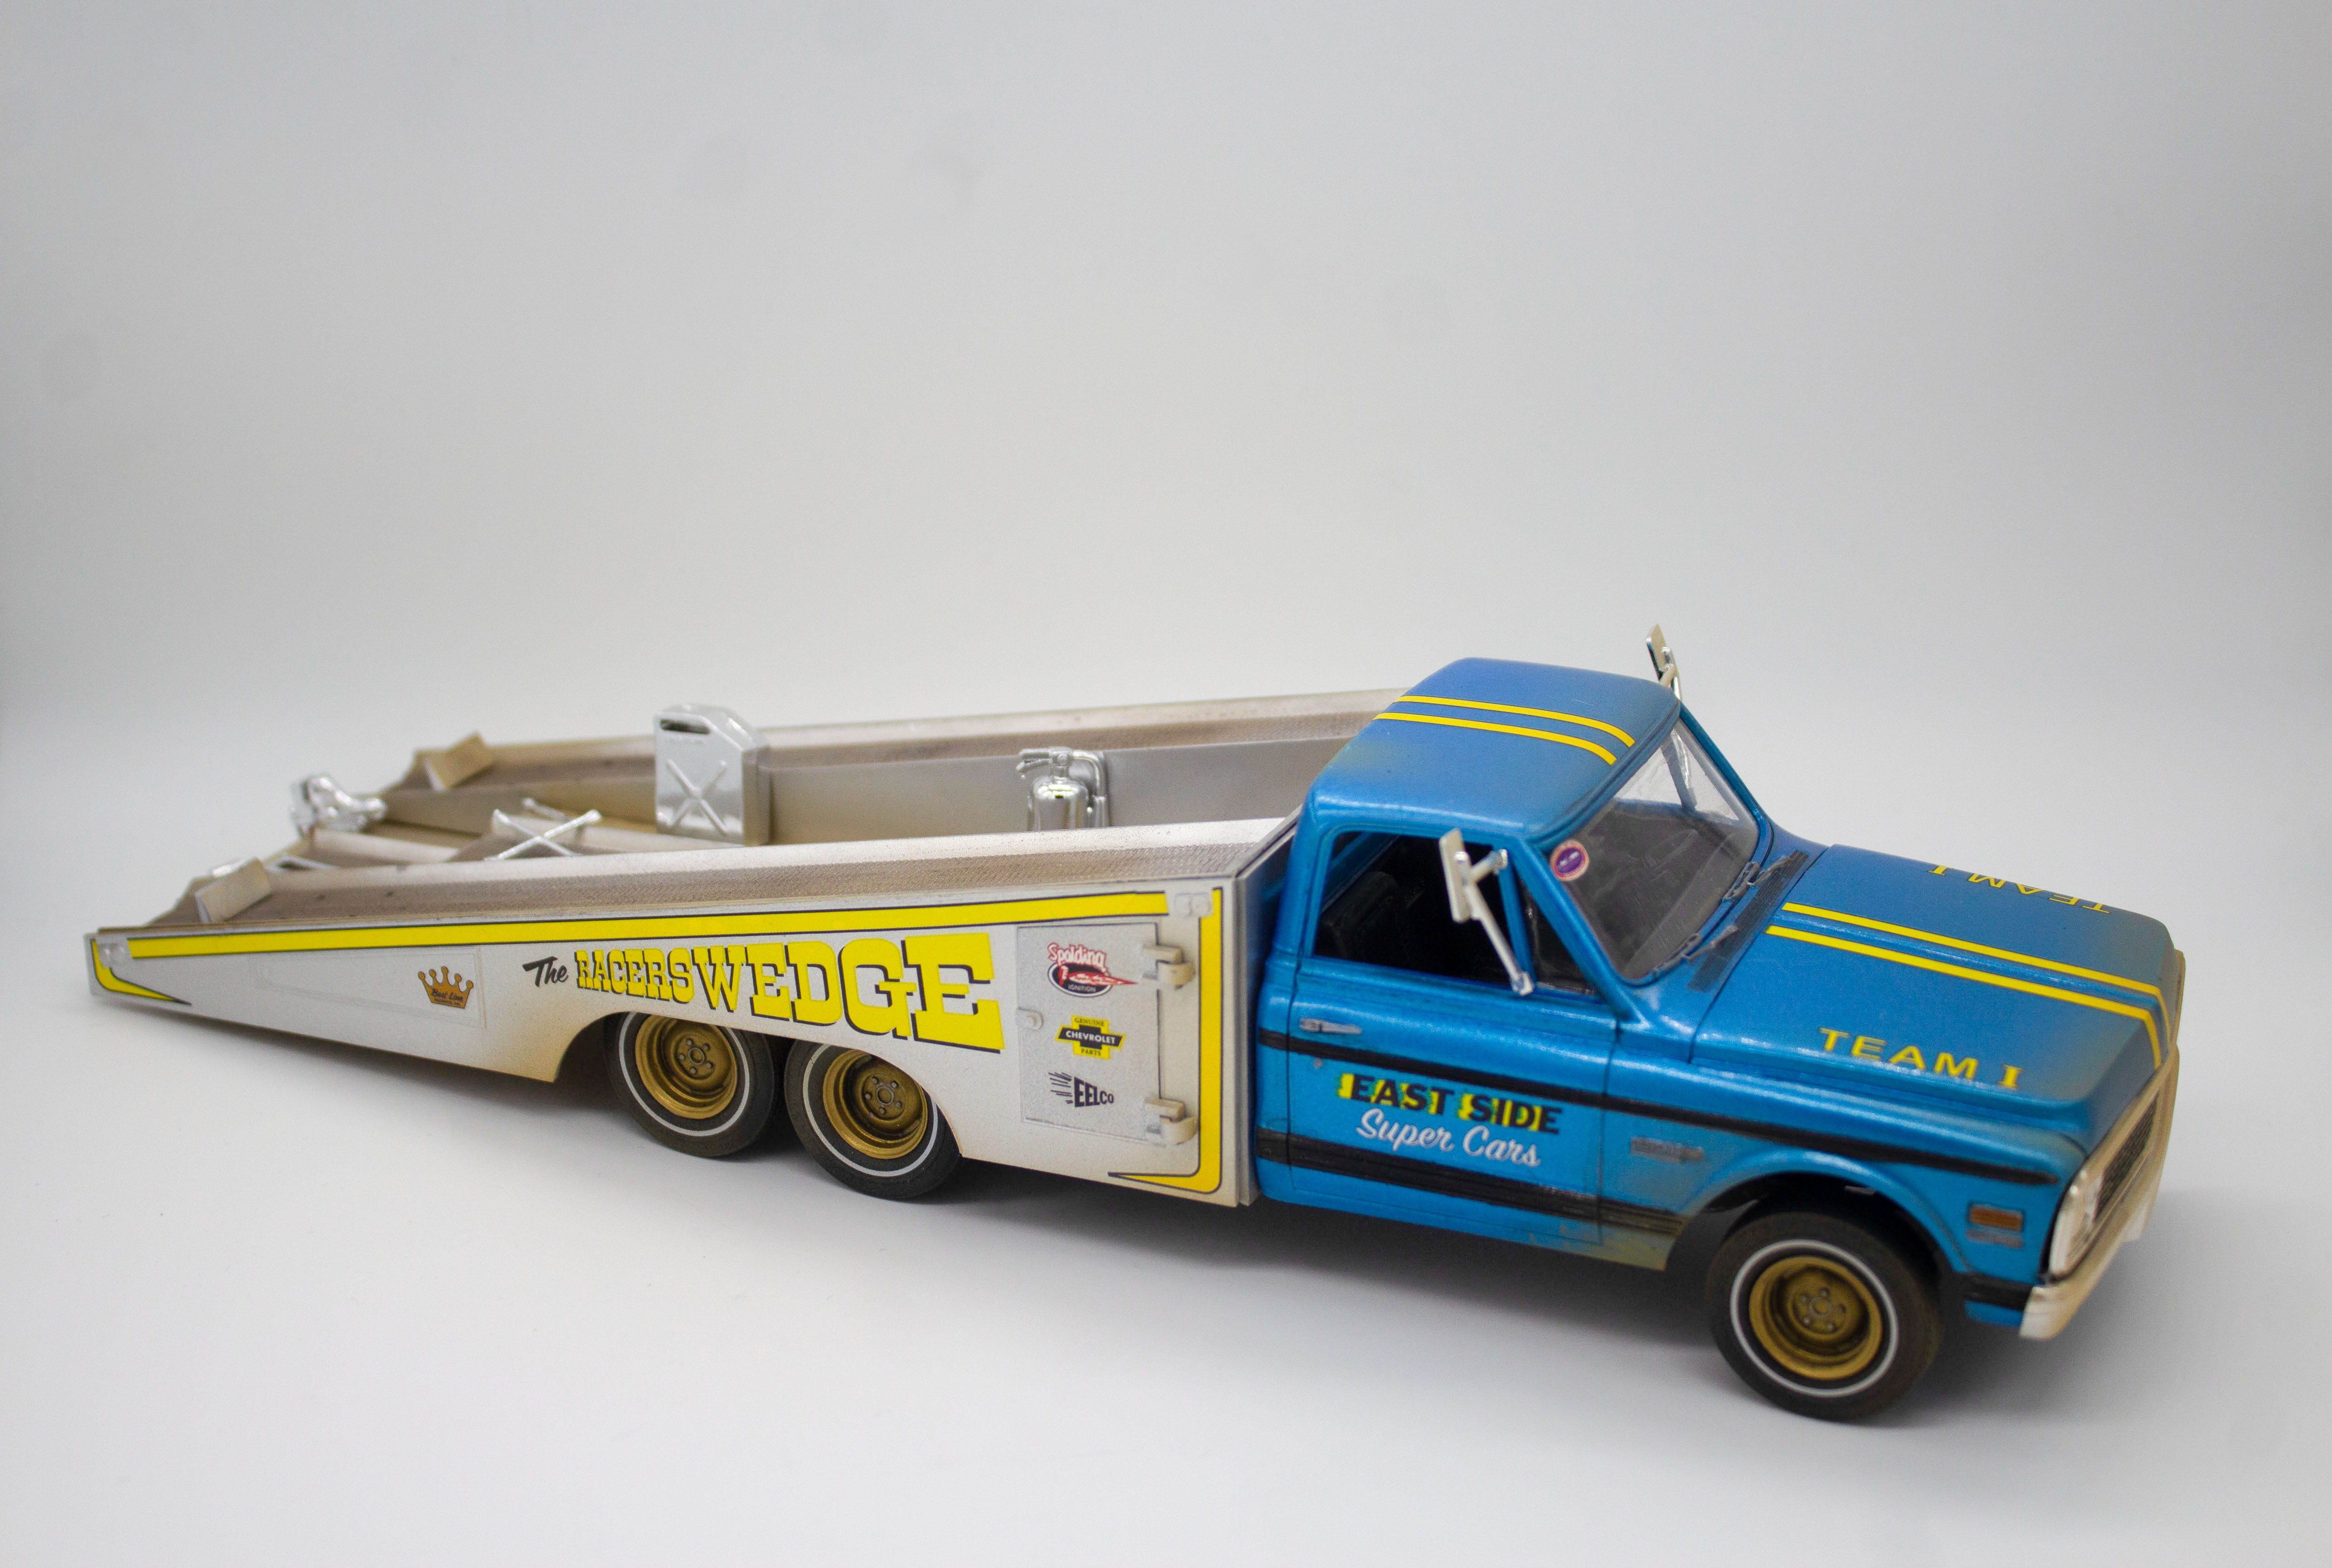 Build review of the MPC 1972 Chevy Racer's Wedge Pickup 2'-in-1 